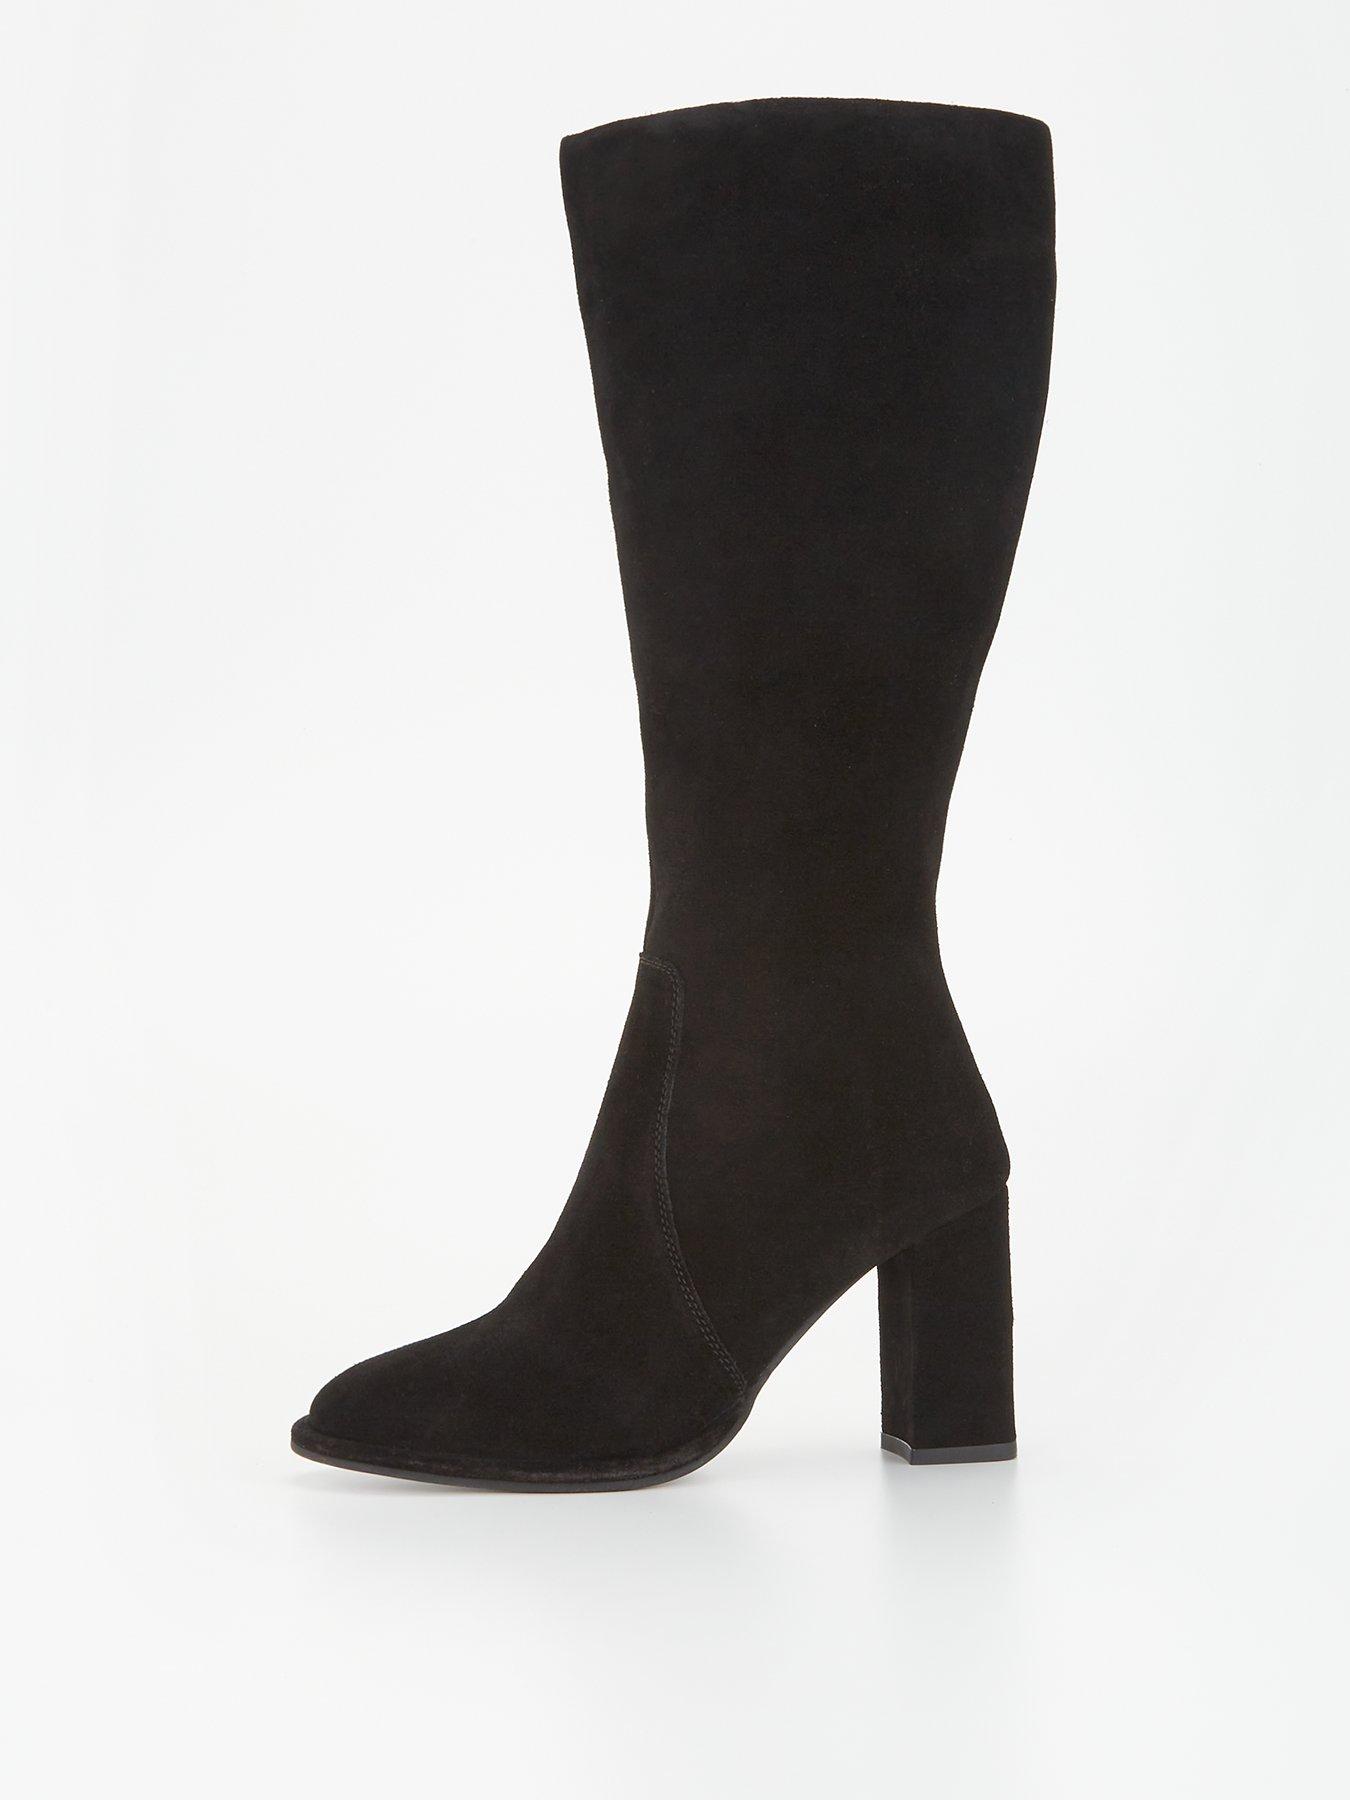 My Favorite Faux Leather Pants + Shop These Top Selling Booties On Sale for  $59! - Truly Megan